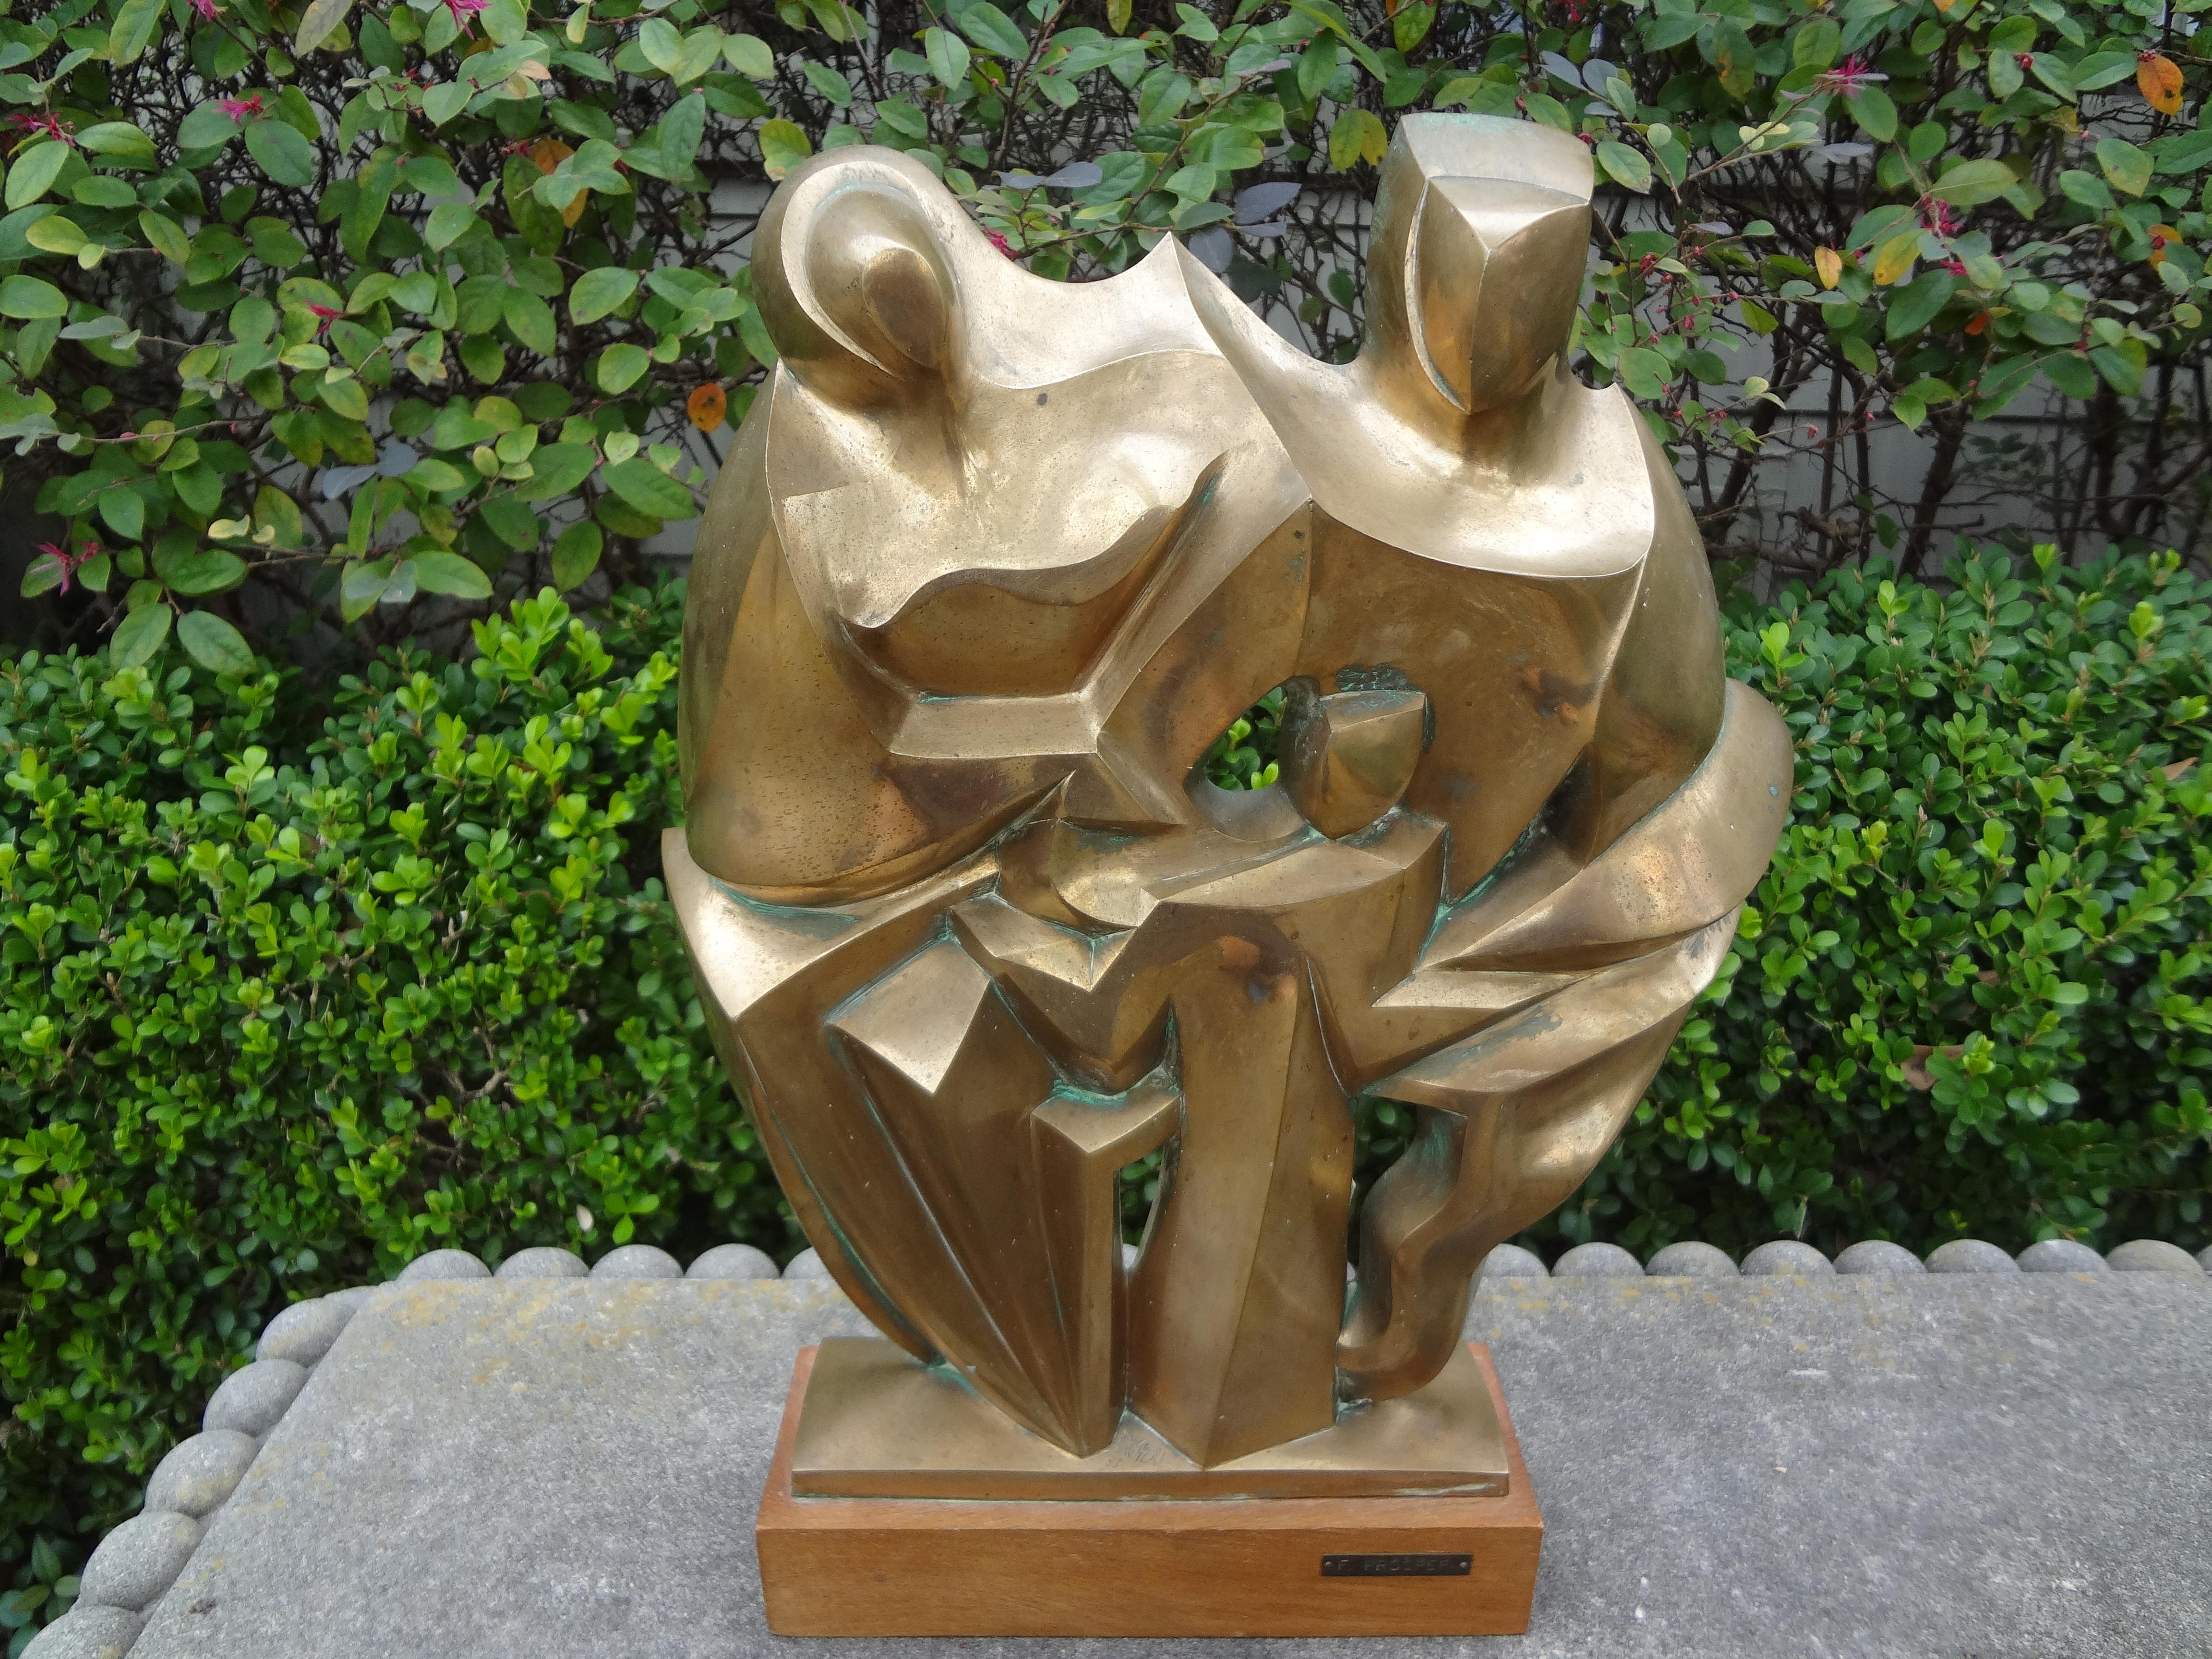 Mid-Century Modern bronze cubist sculpture, signed F. Prosperi.
Beautifully executed Mid-Century Modern gilt bronze cubist sculpture, signed F. Prosperi. This beautifully executed bronze sculpture is mounted on a wooden base with an artist name